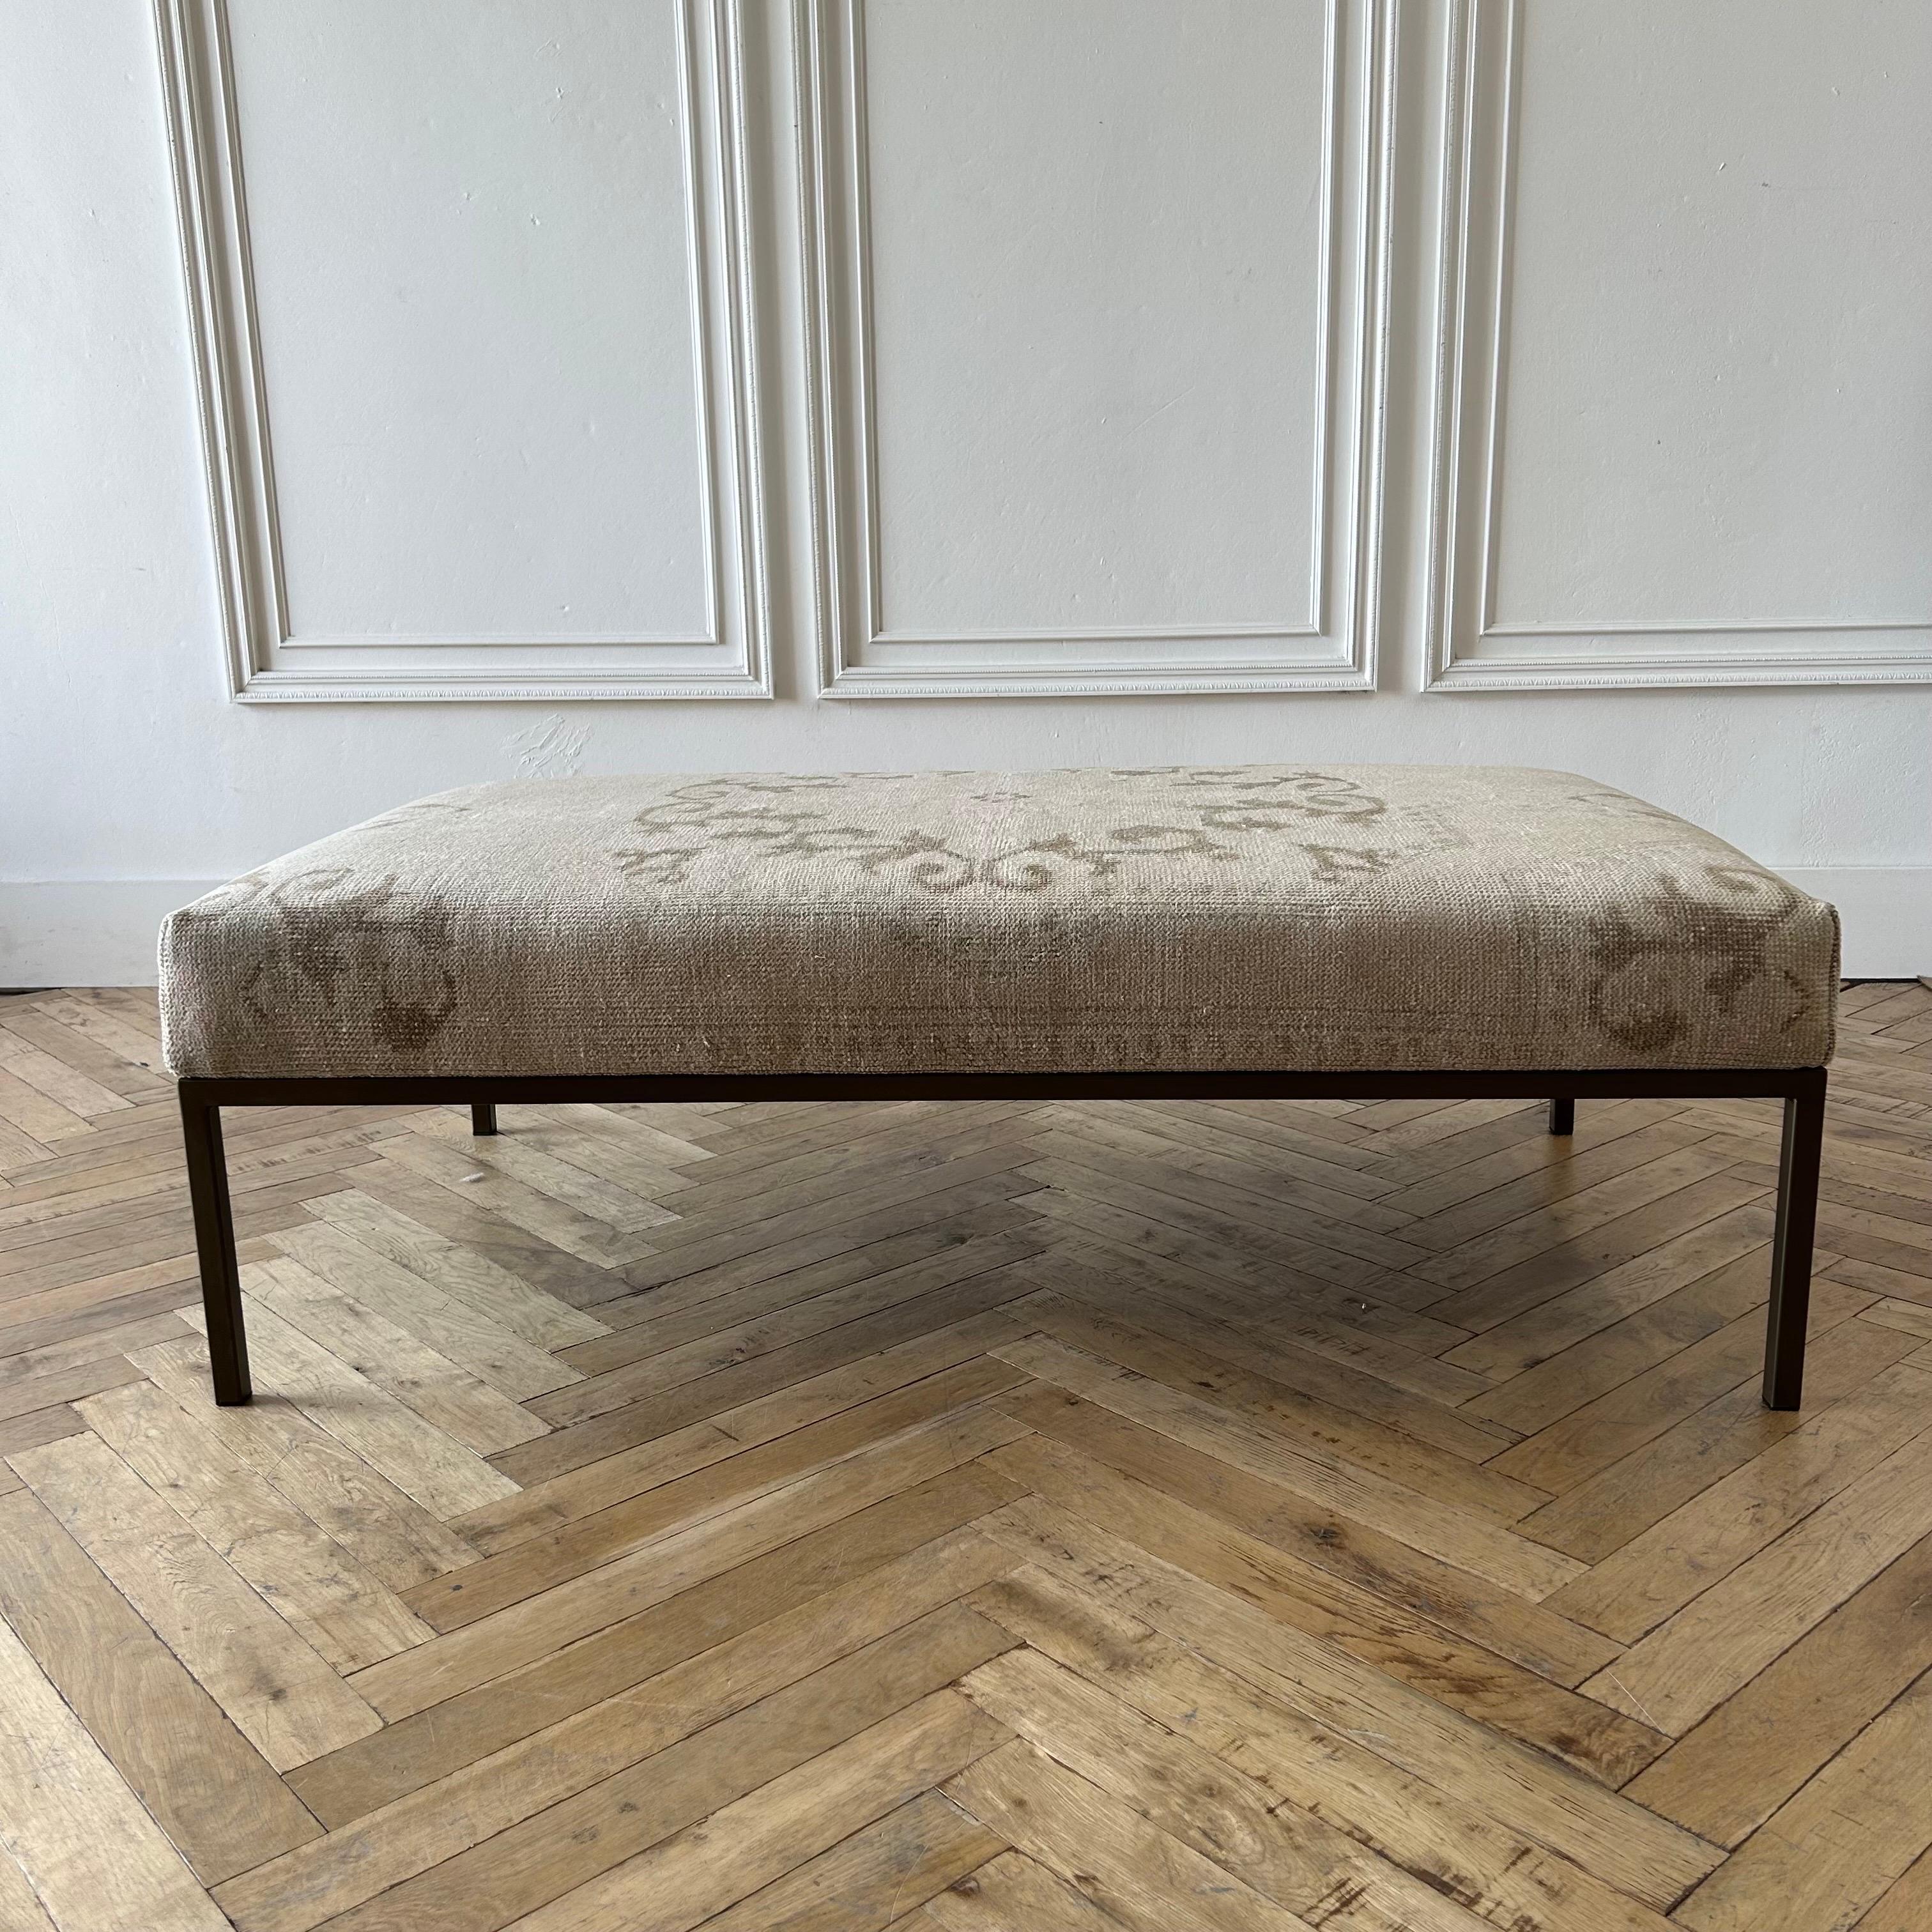 Custom made bench ottoman by Bloom Home Inc.
Size: 56”w x 32”d x 18”h
Custom made metal base, and powder coated in a dark iron bronze finish.
The upholstered top is from an antique or vintage turkish rug.
Color: brown / coco / white / faded pink